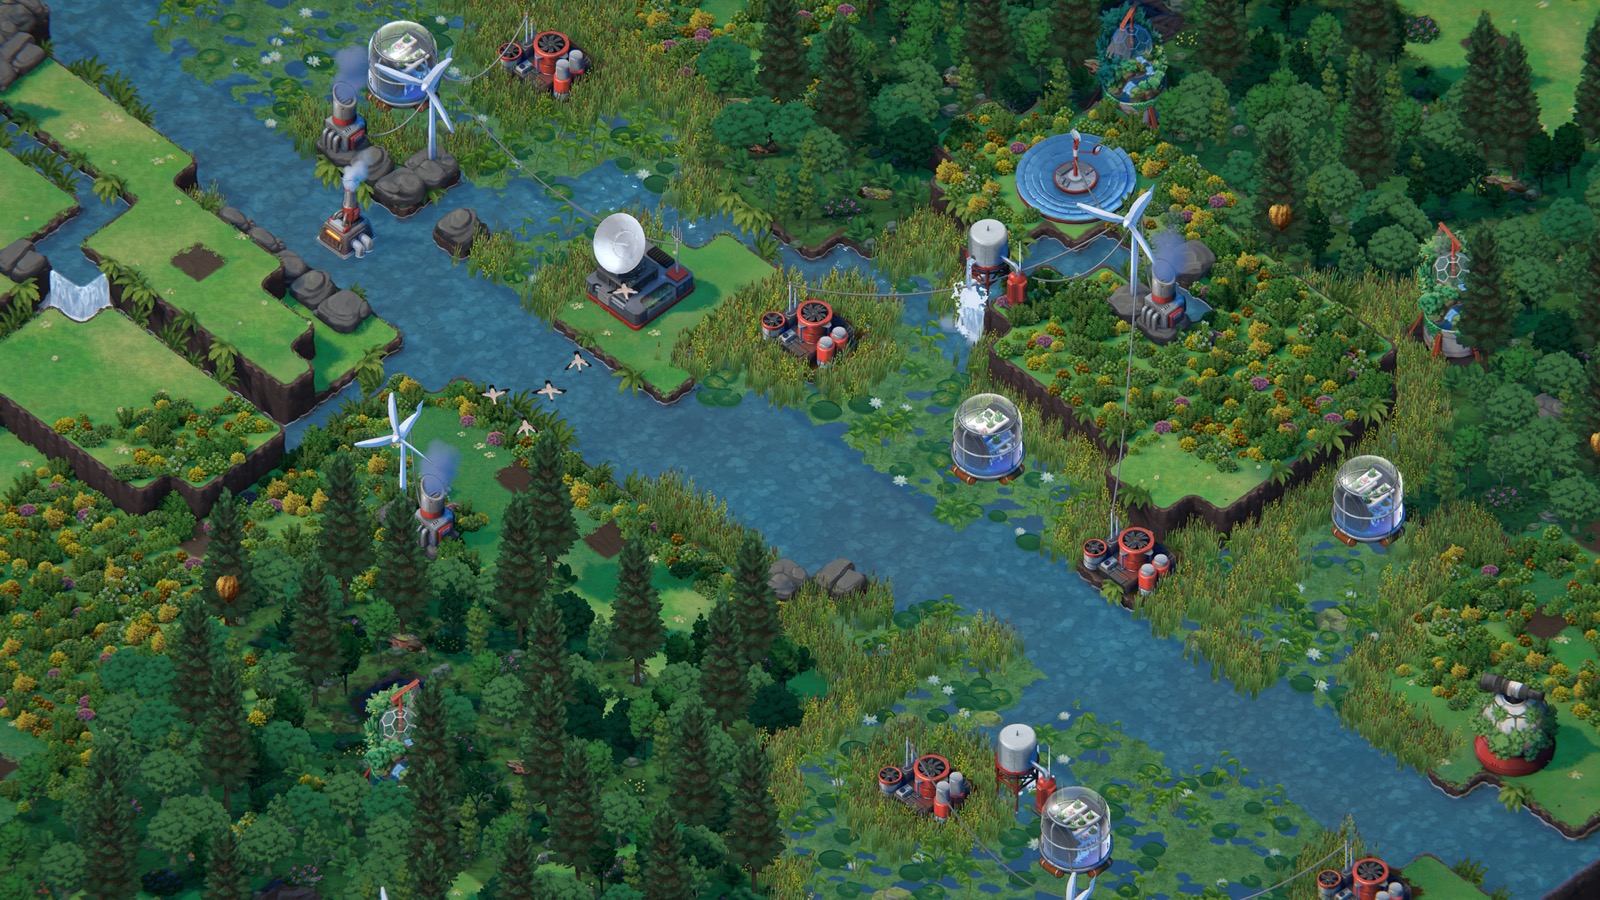 Free-to-Play Gaming: is it a sustainable ecosystem?